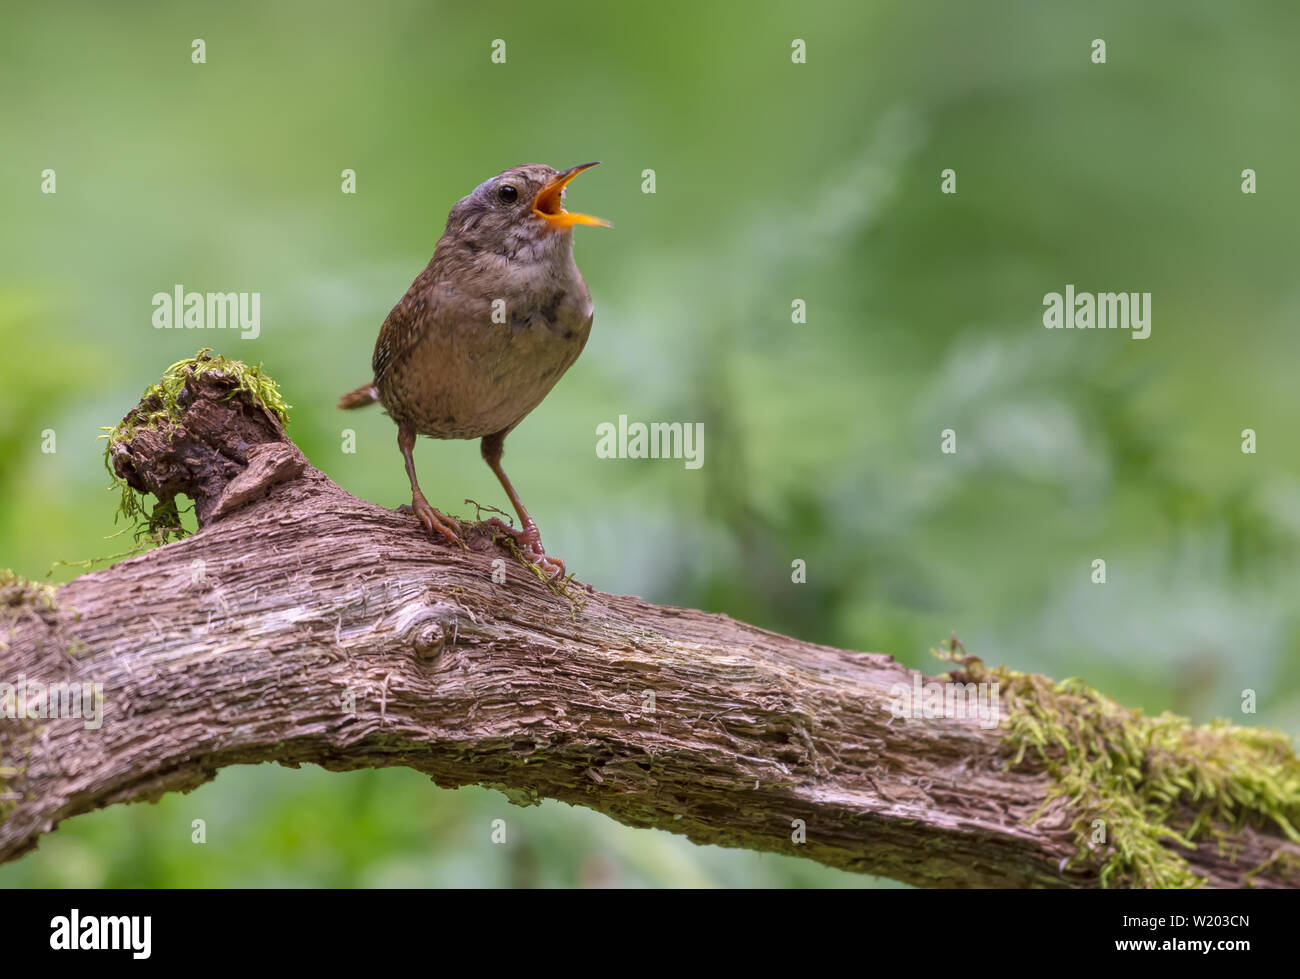 Loud singing of Eurasian wren perched on old mossy stump Stock Photo